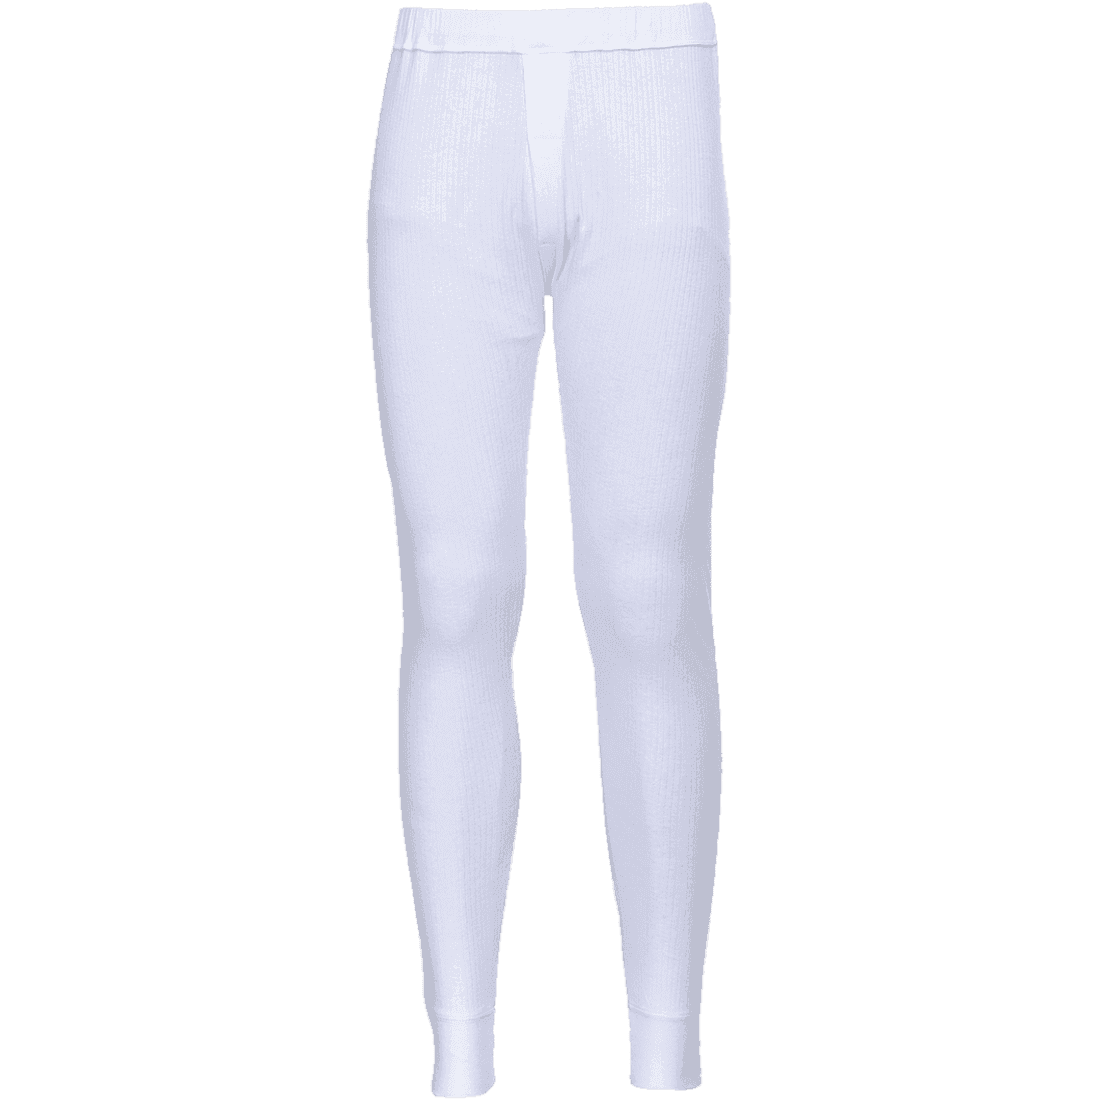 B121 Thermal Trousers Portwest